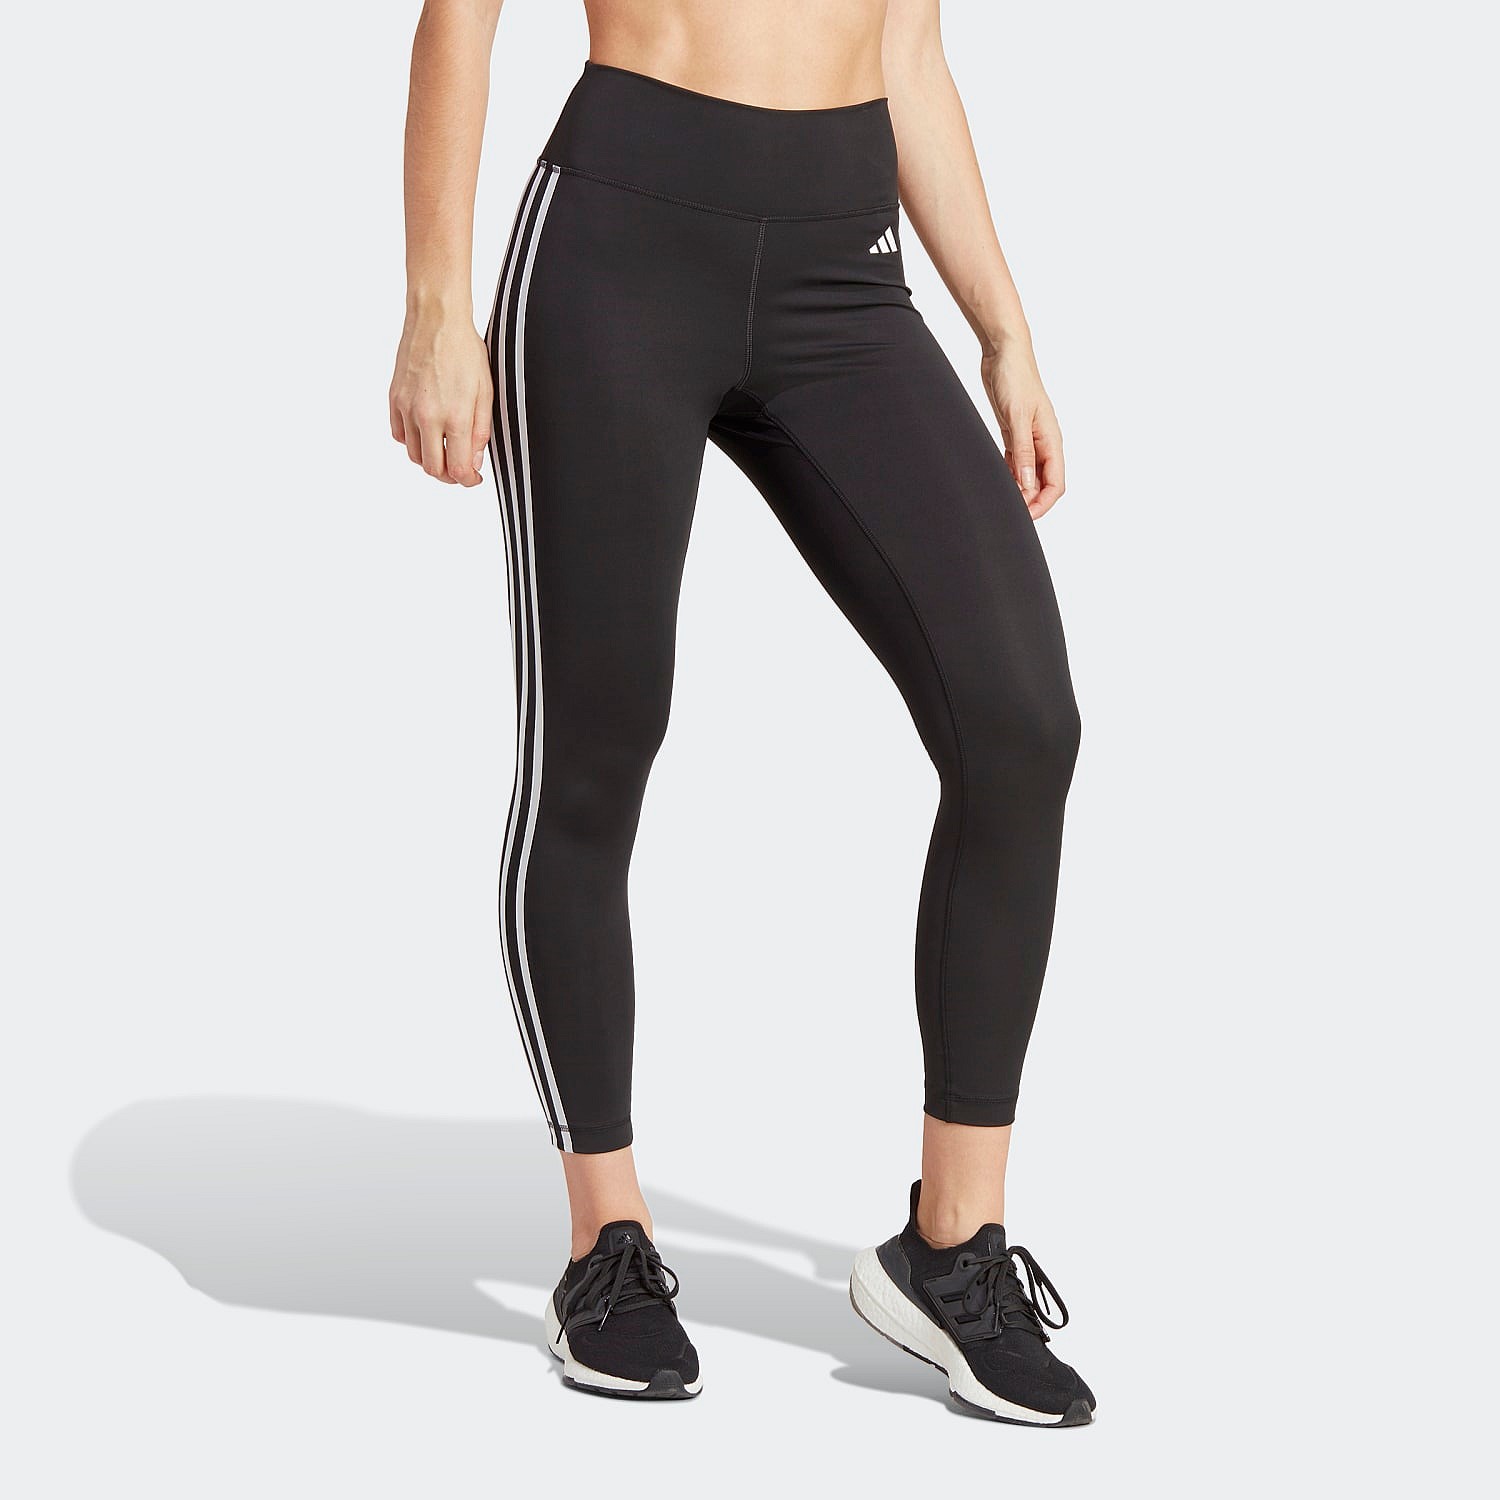 Adidas 3-Stripes 7/8 Tights | Tights | Stirling Sports